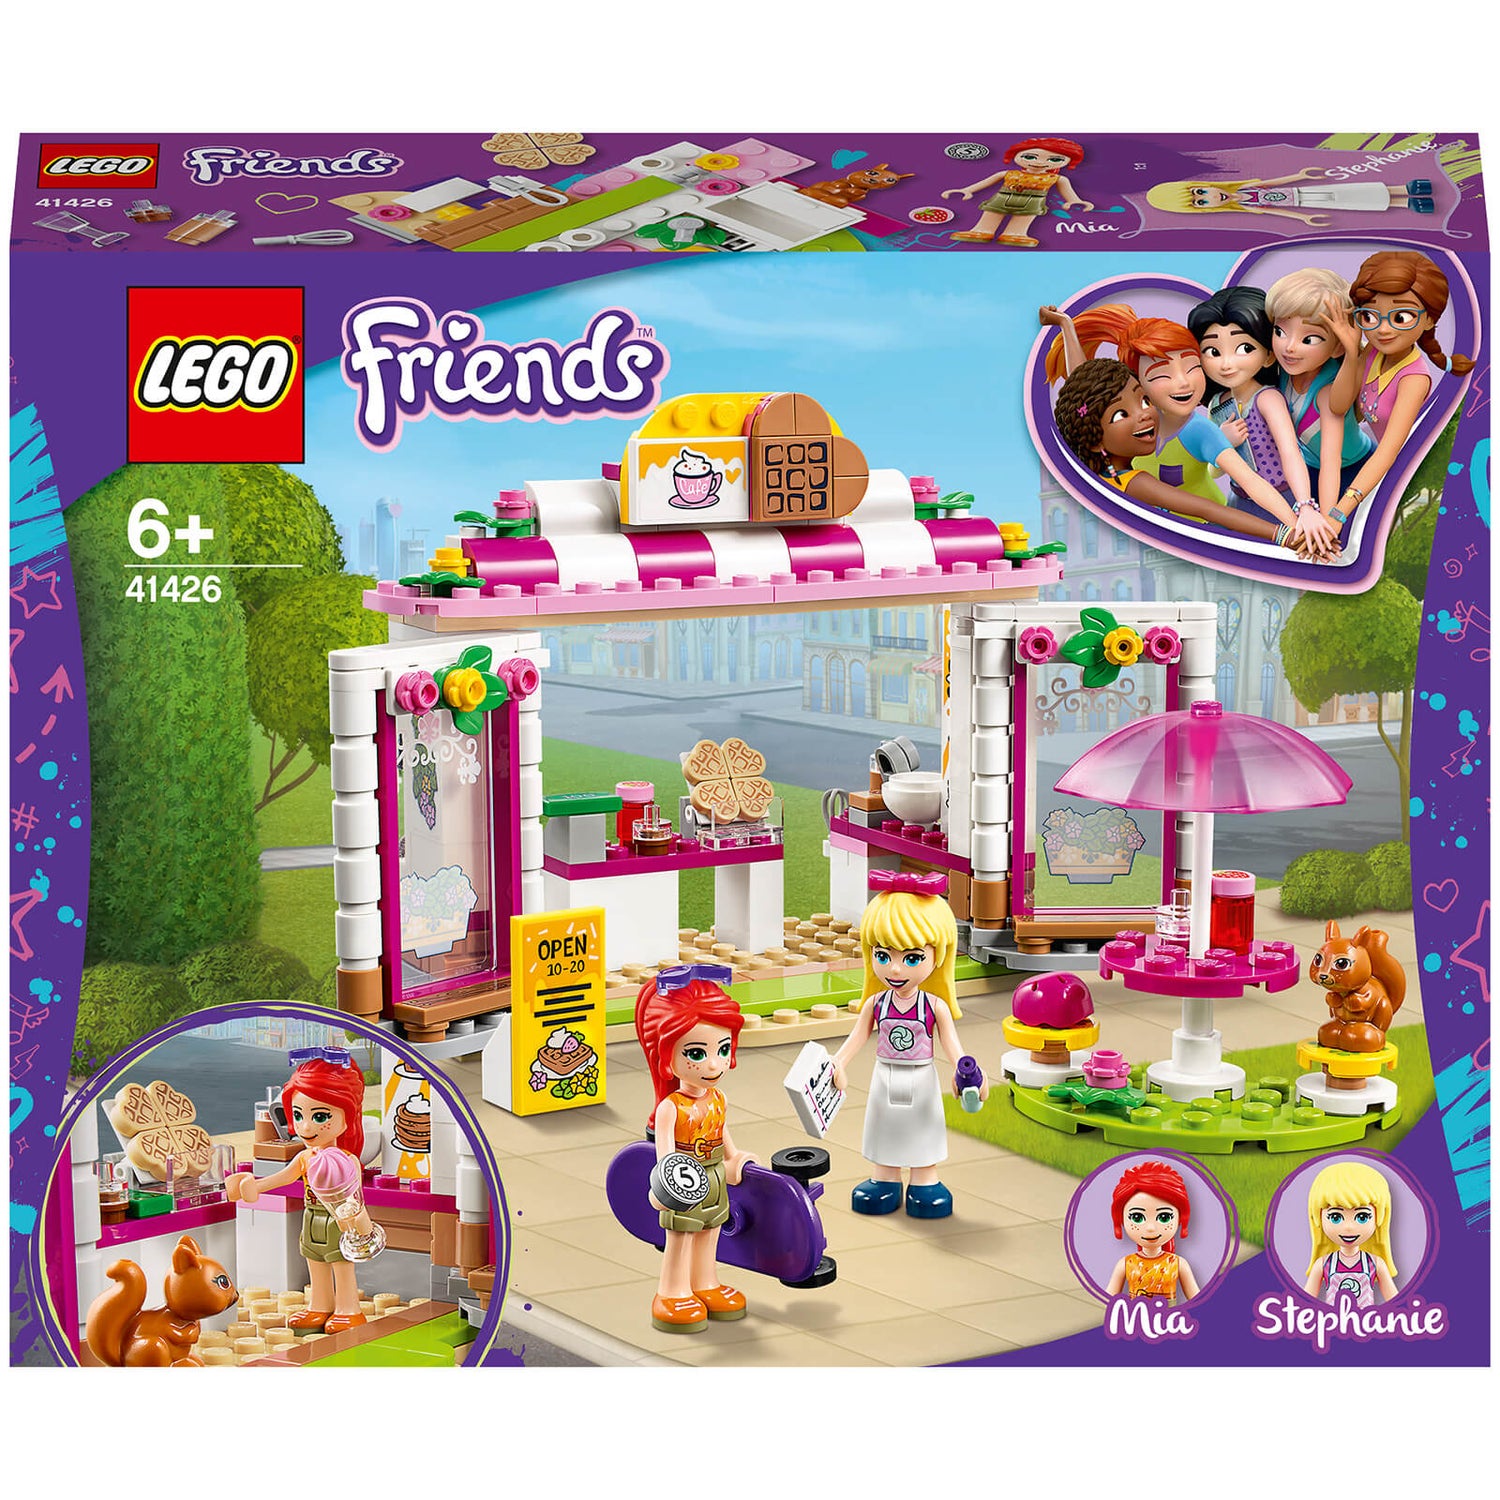 Lego Friends: ALL of the Heartlake City Sets for Girls! - HubPages